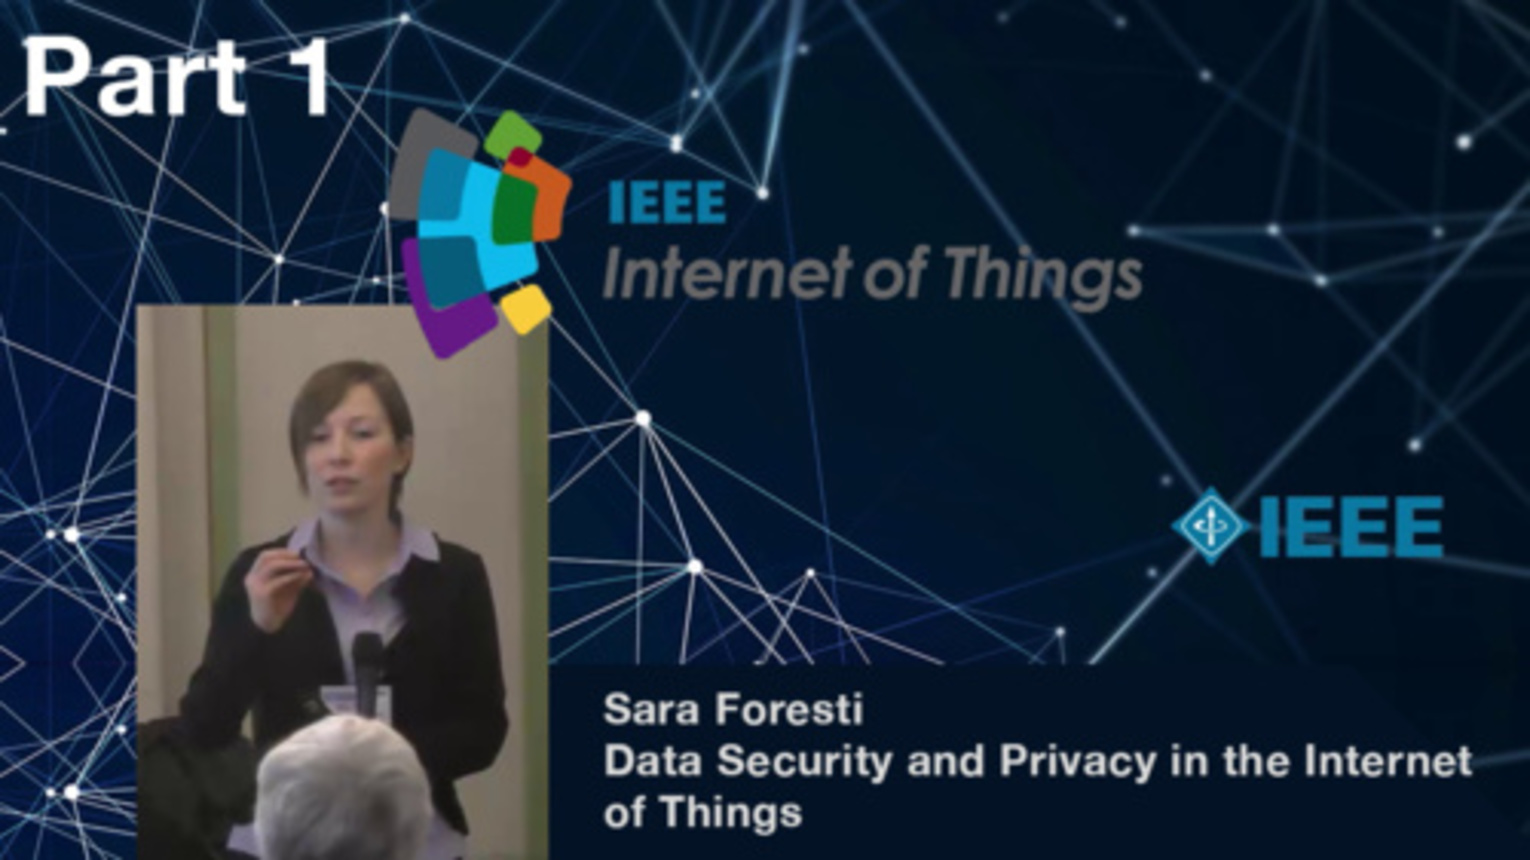 Part 1: Data Security and Privacy in the Internet of Things - Sara Foresti, IEEE WF-IoT 2015